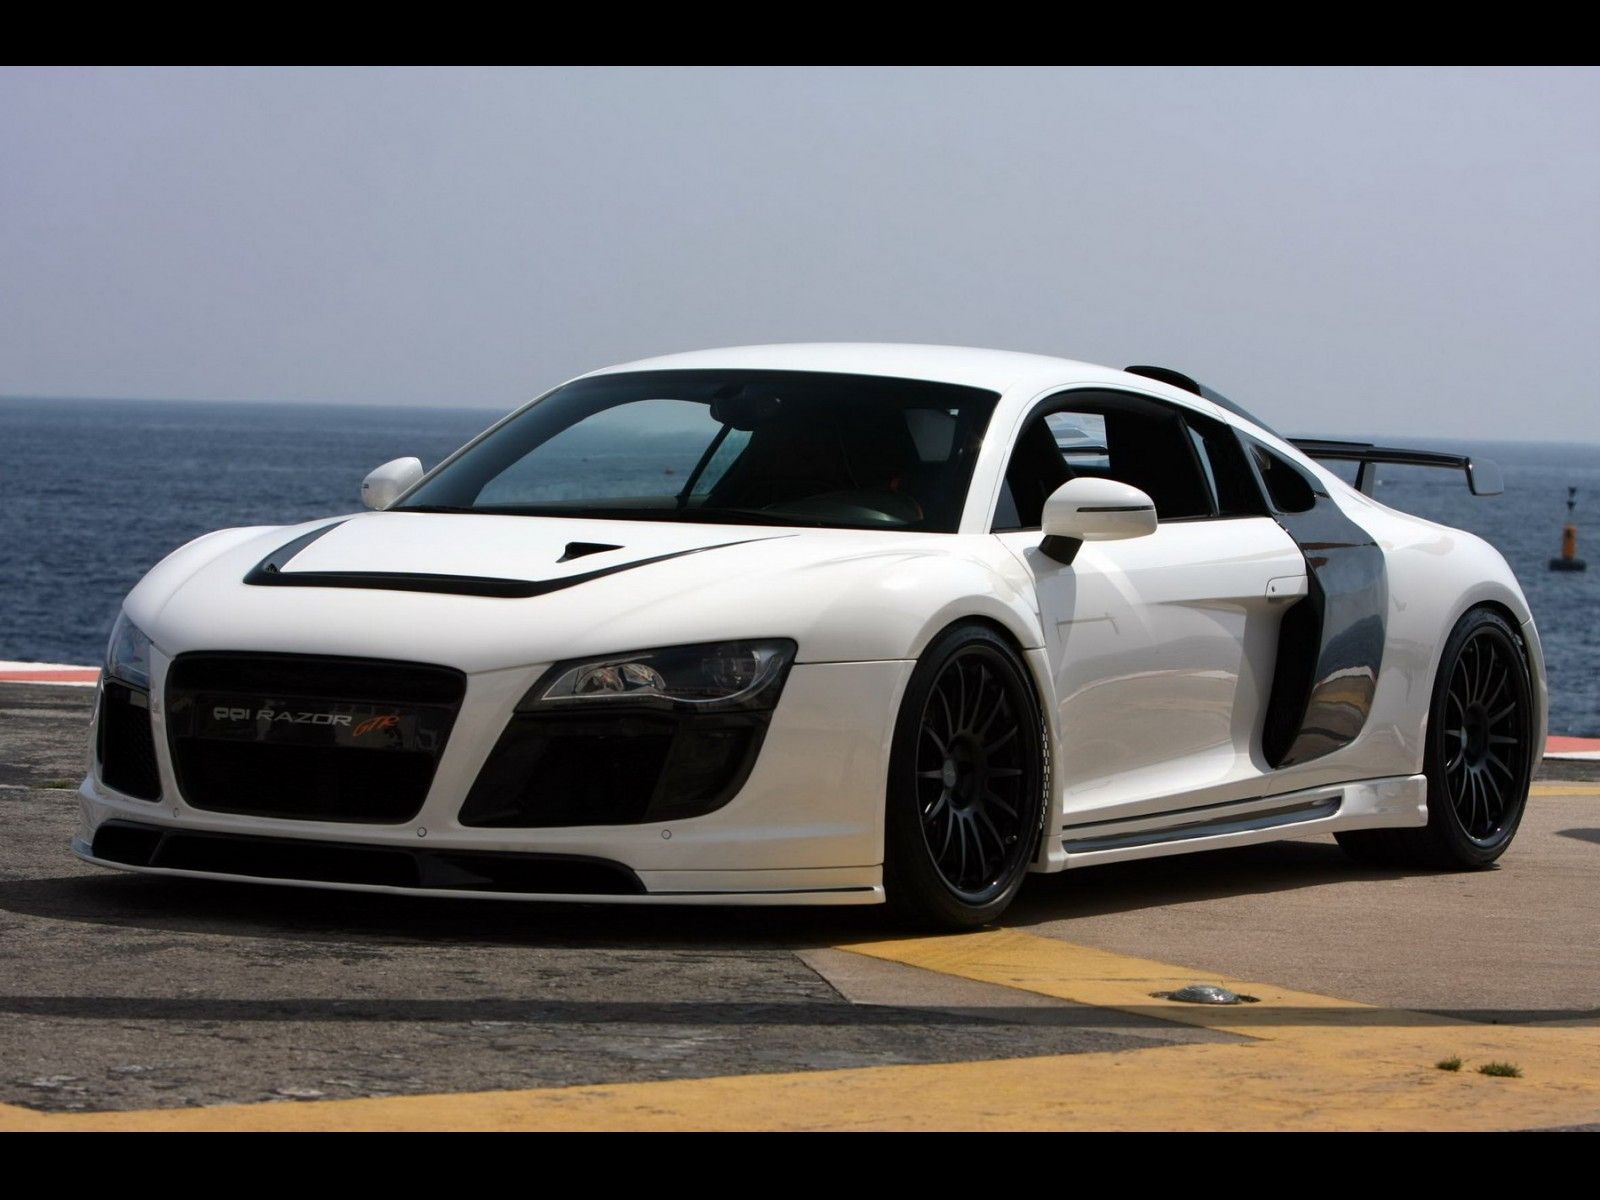 Audi R8 Gtr Background Image id: 2640 - 7HDWallpapers